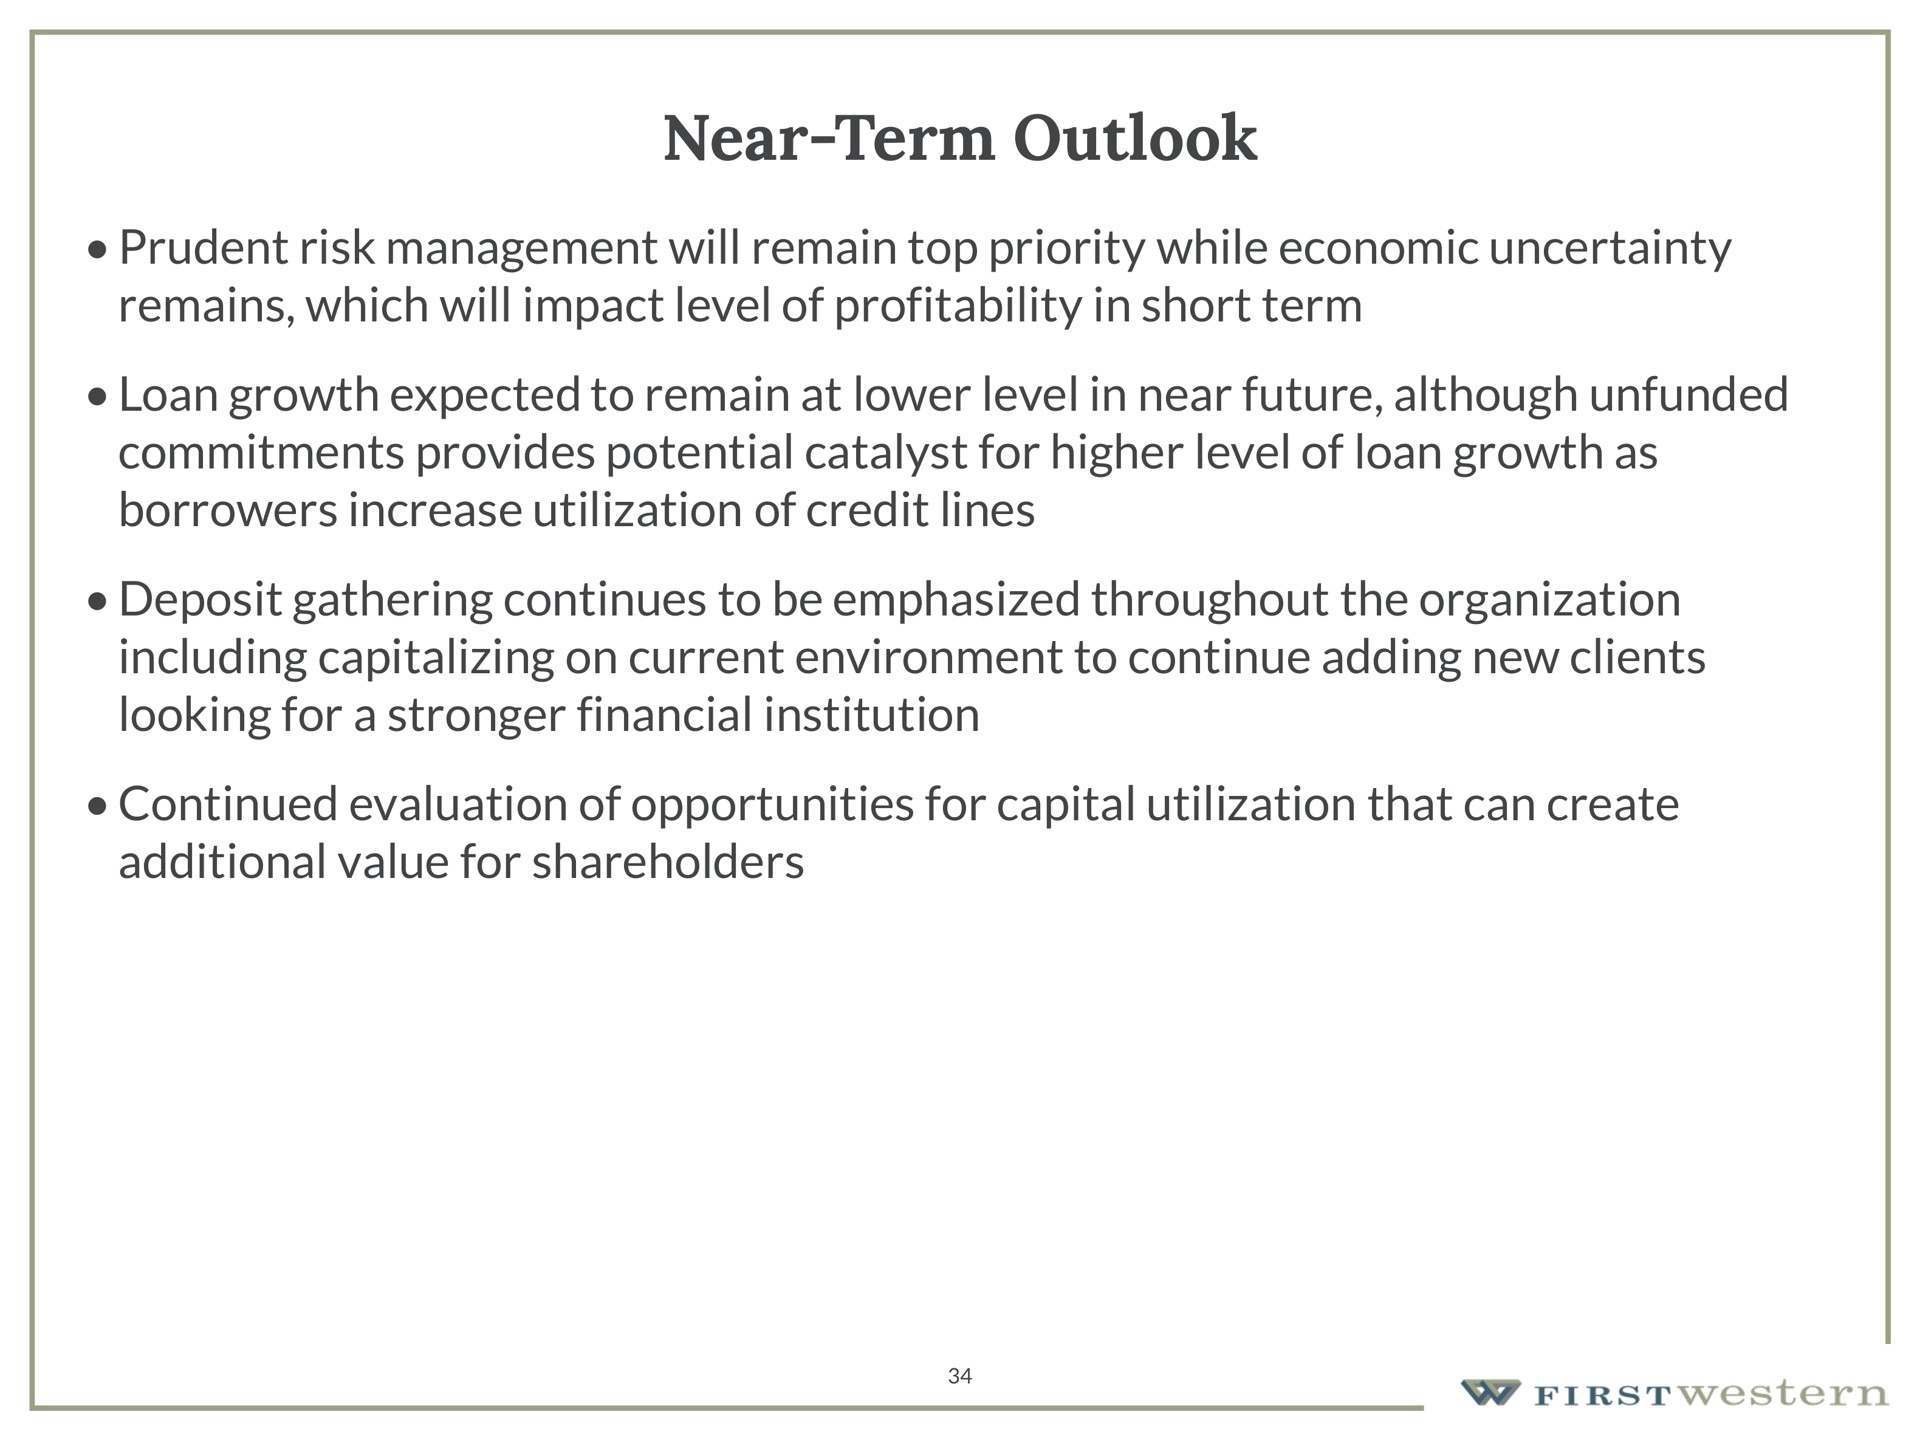 near term outlook prudent risk management will remain top priority while economic uncertainty remains which will impact level of profitability in short term loan growth expected to remain at lower level in near future although unfunded commitments provides potential catalyst for higher level of loan growth as borrowers increase utilization of credit lines deposit gathering continues to be emphasized throughout the organization including capitalizing on current environment to continue adding new clients looking for a financial institution continued evaluation of opportunities for capital utilization that can create additional value for shareholders | First Western Financial